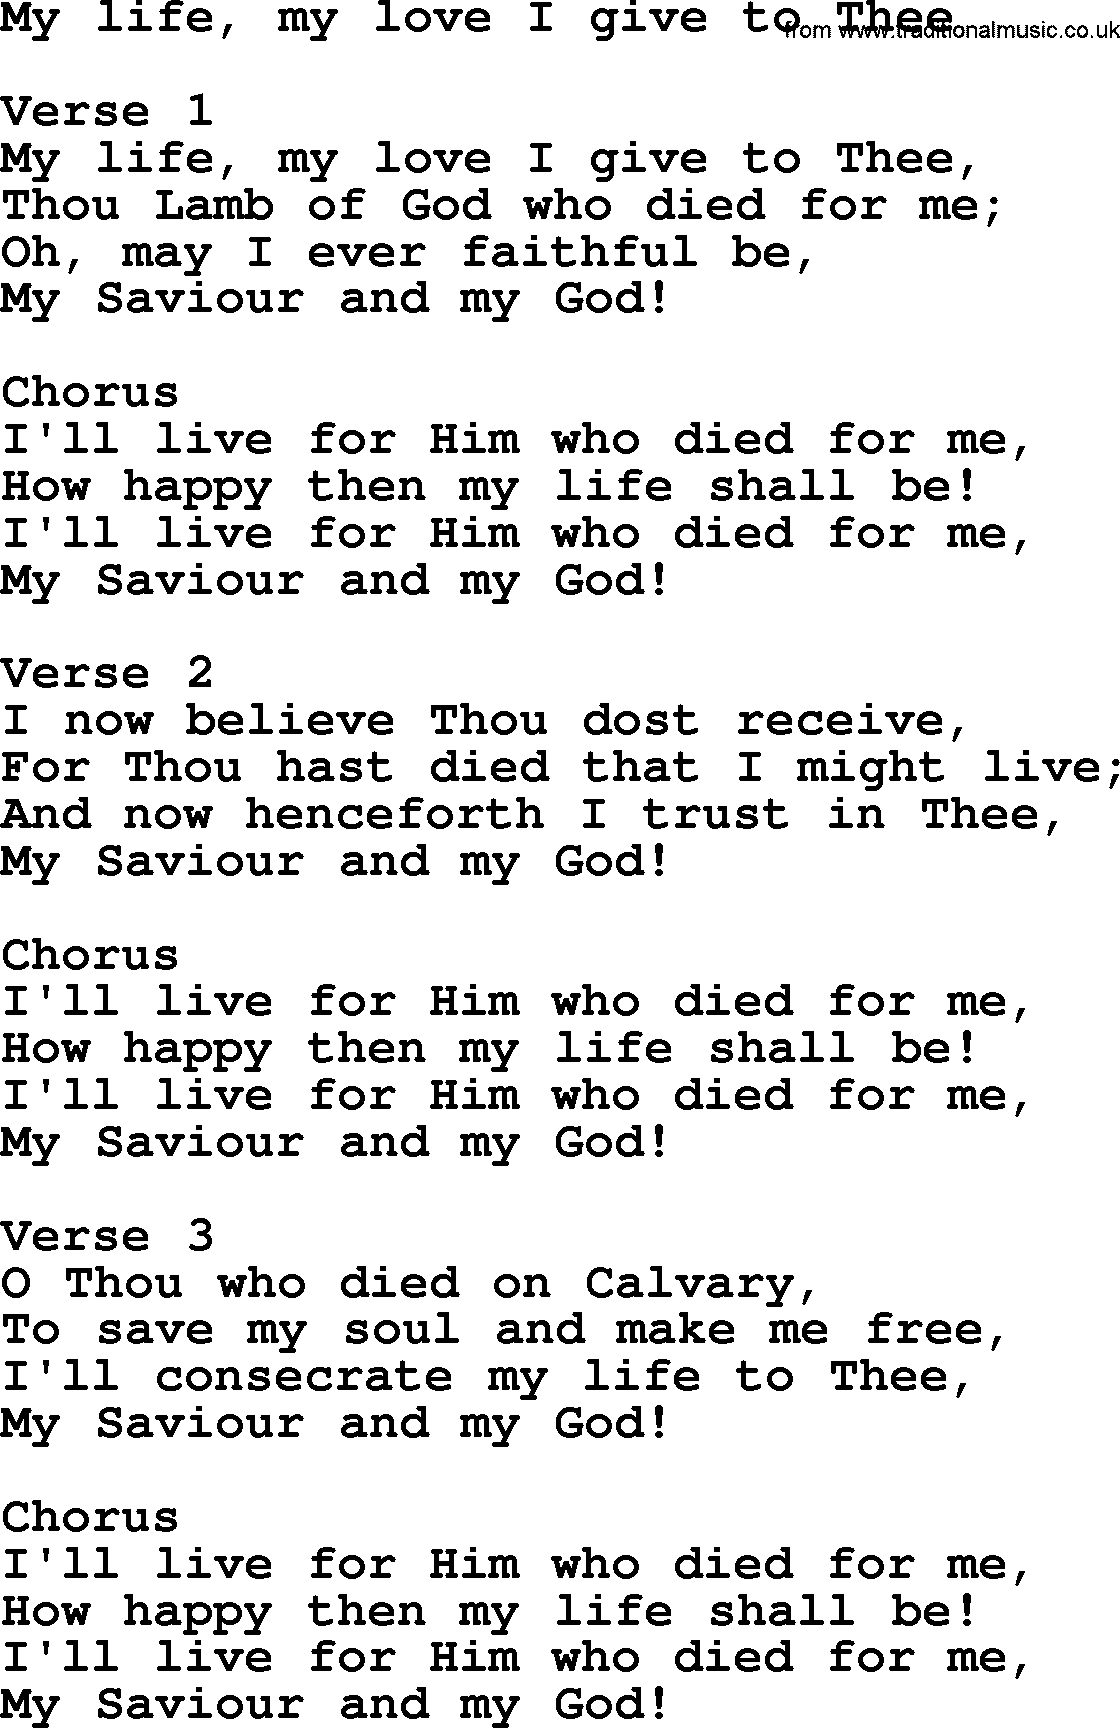 Apostolic and Pentecostal Hymns and Gospel Songs, Hymn: My Life, My Love I Give To Thee, Christian lyrics and PDF